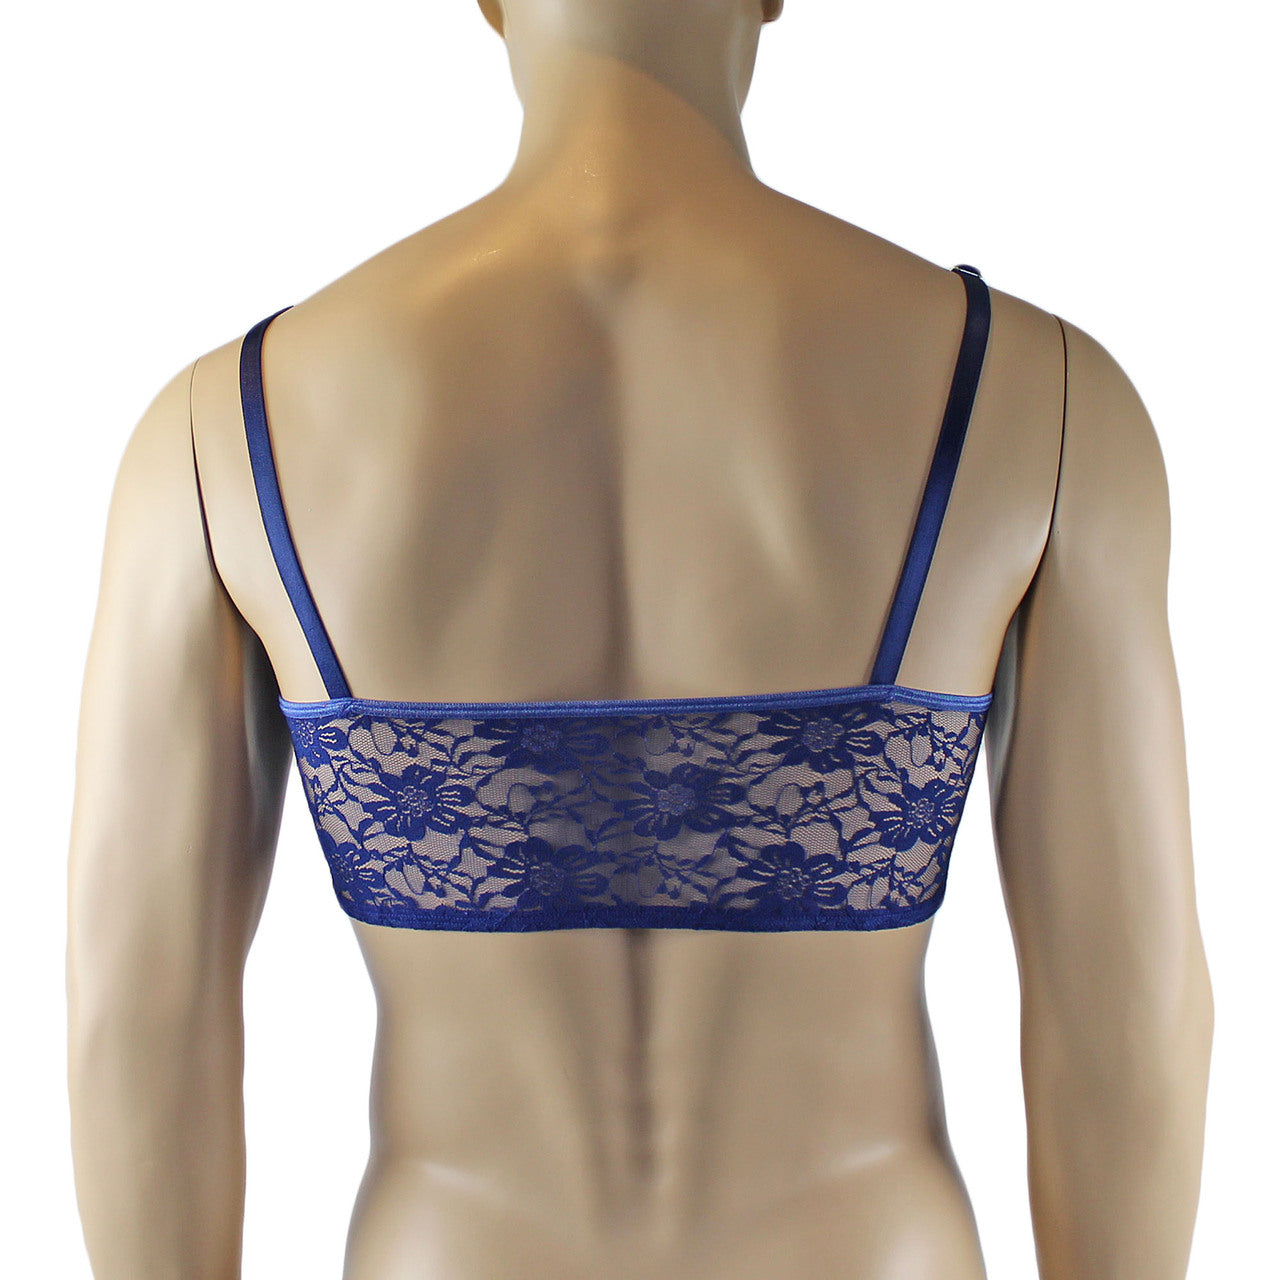 LAST ORDERS - Mens Sexy Lace Crop Top Bra and Matching Lace Thong Navy